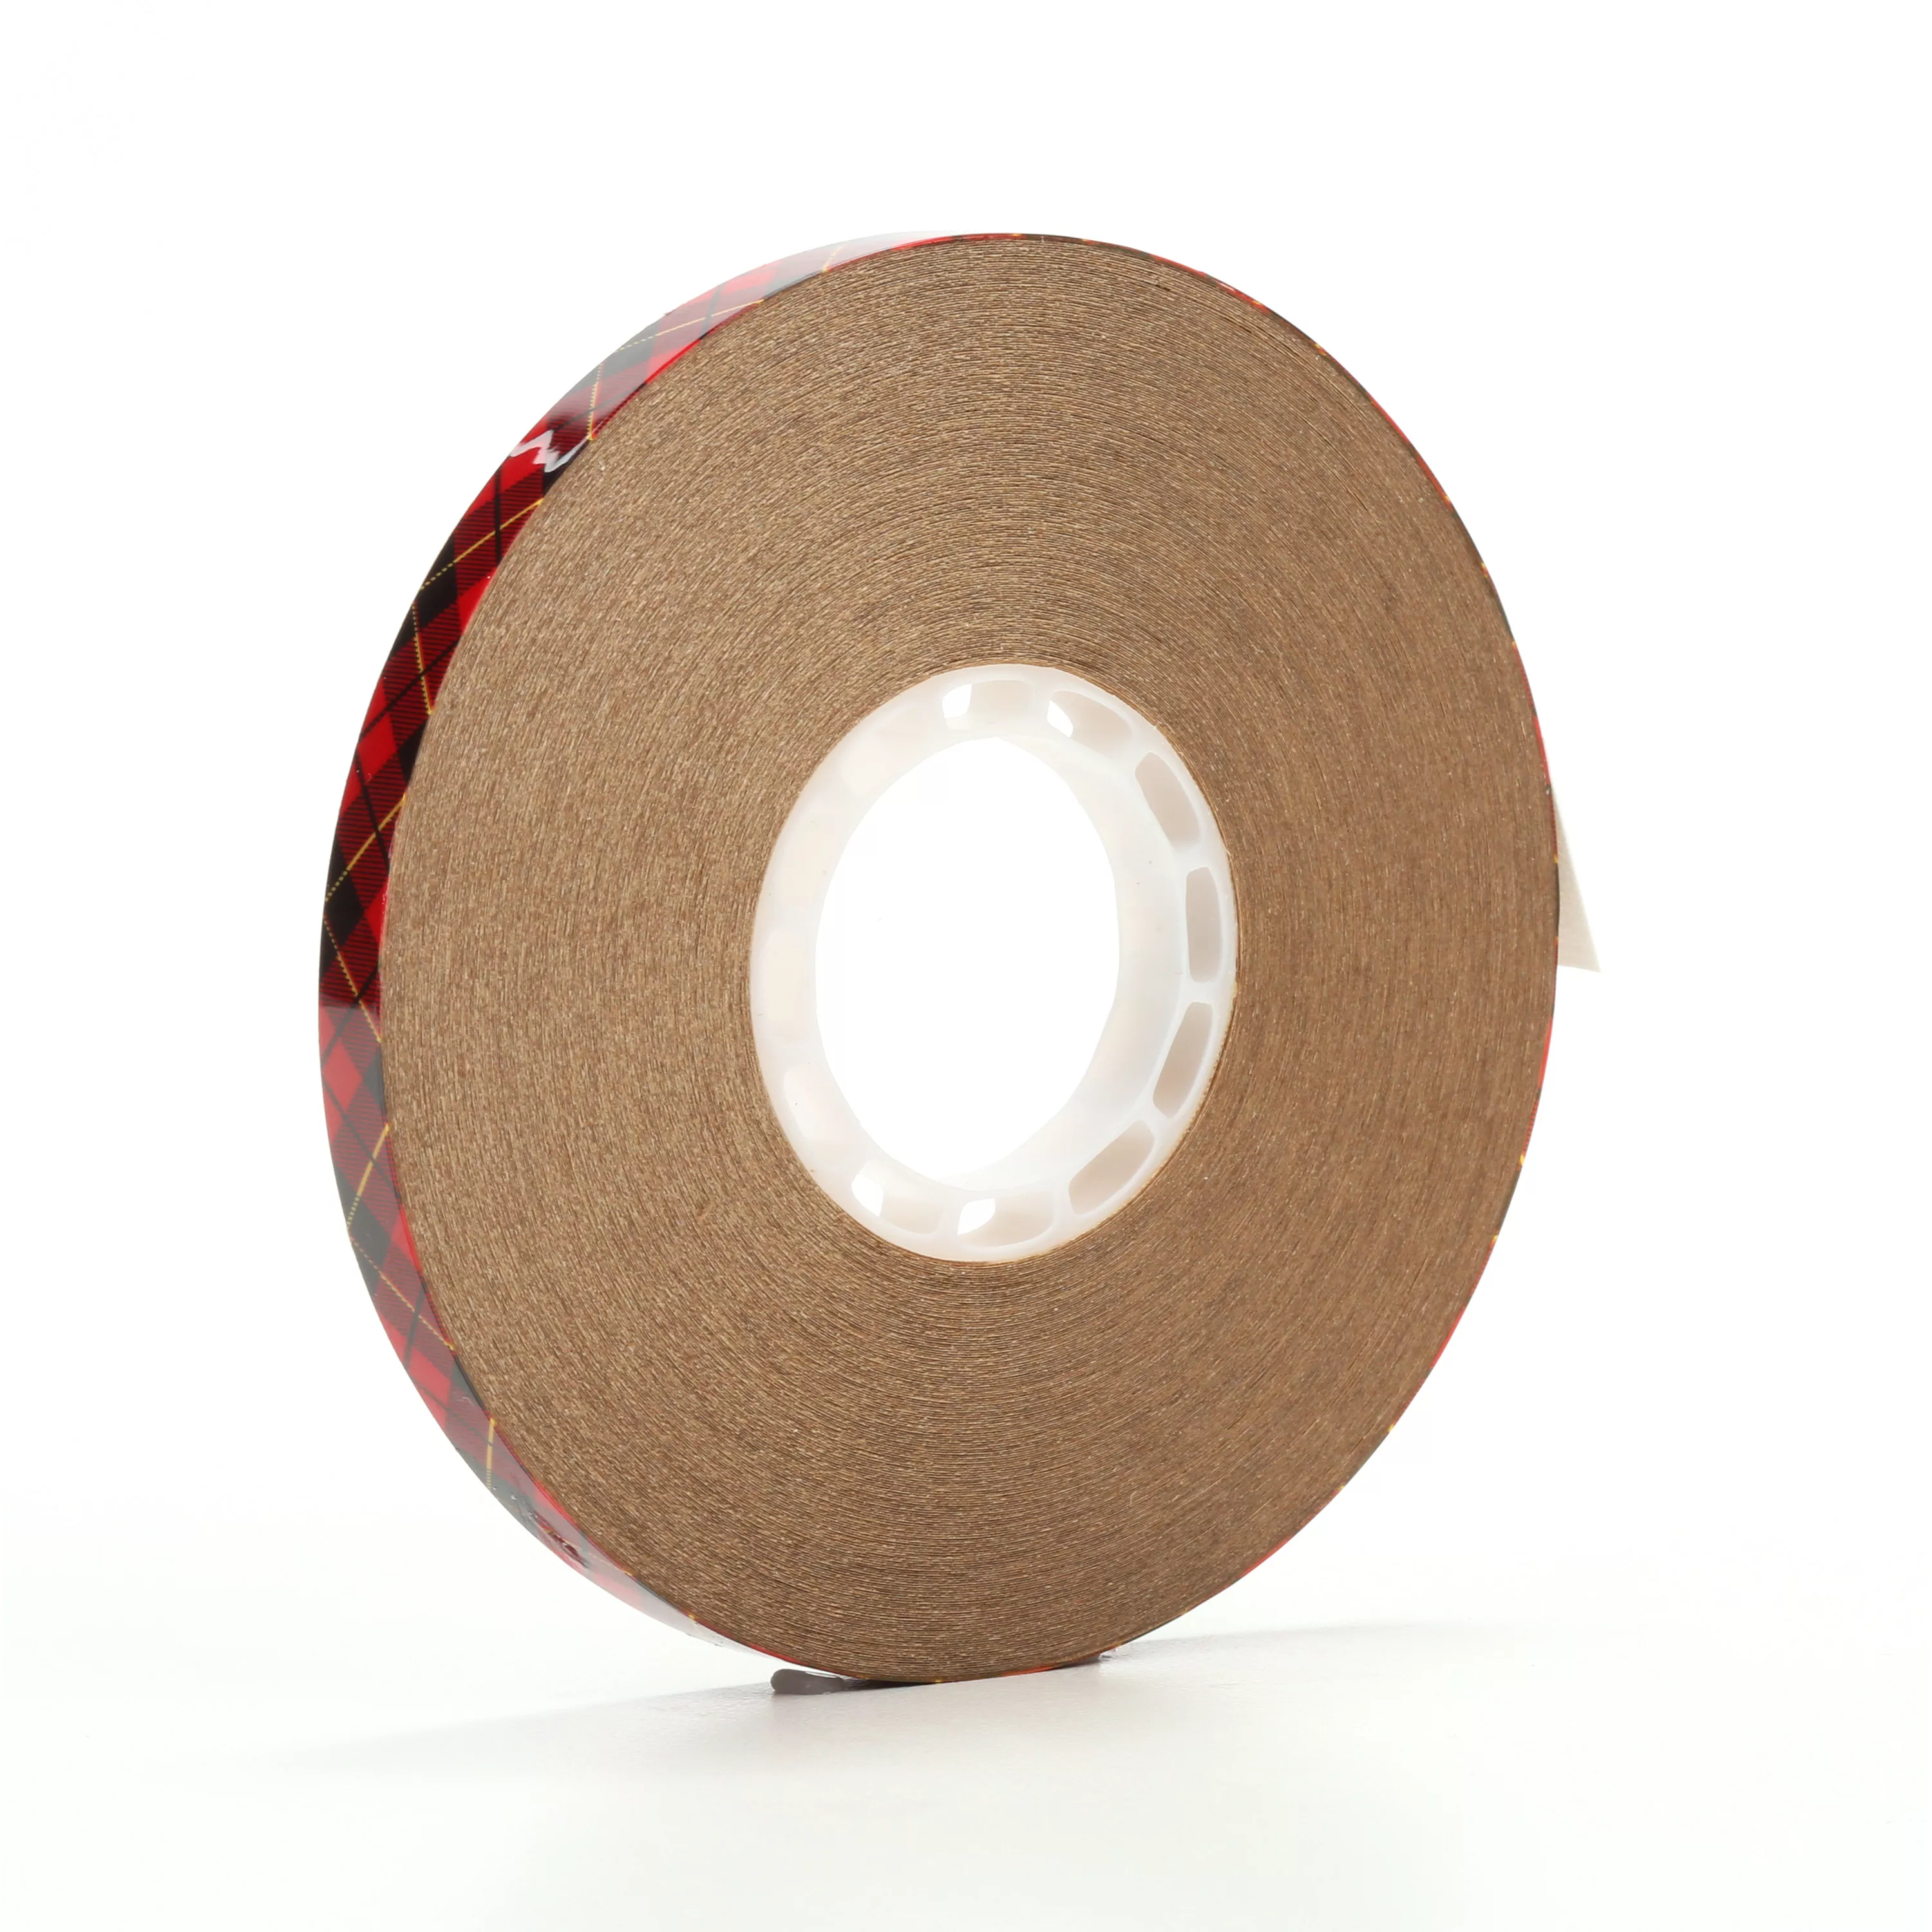 Scotch® ATG Adhesive Transfer Tape 976, Clear, 1/4 in x 36 yd, 2 mil,
(12 Roll/Carton) 72 Roll/Case